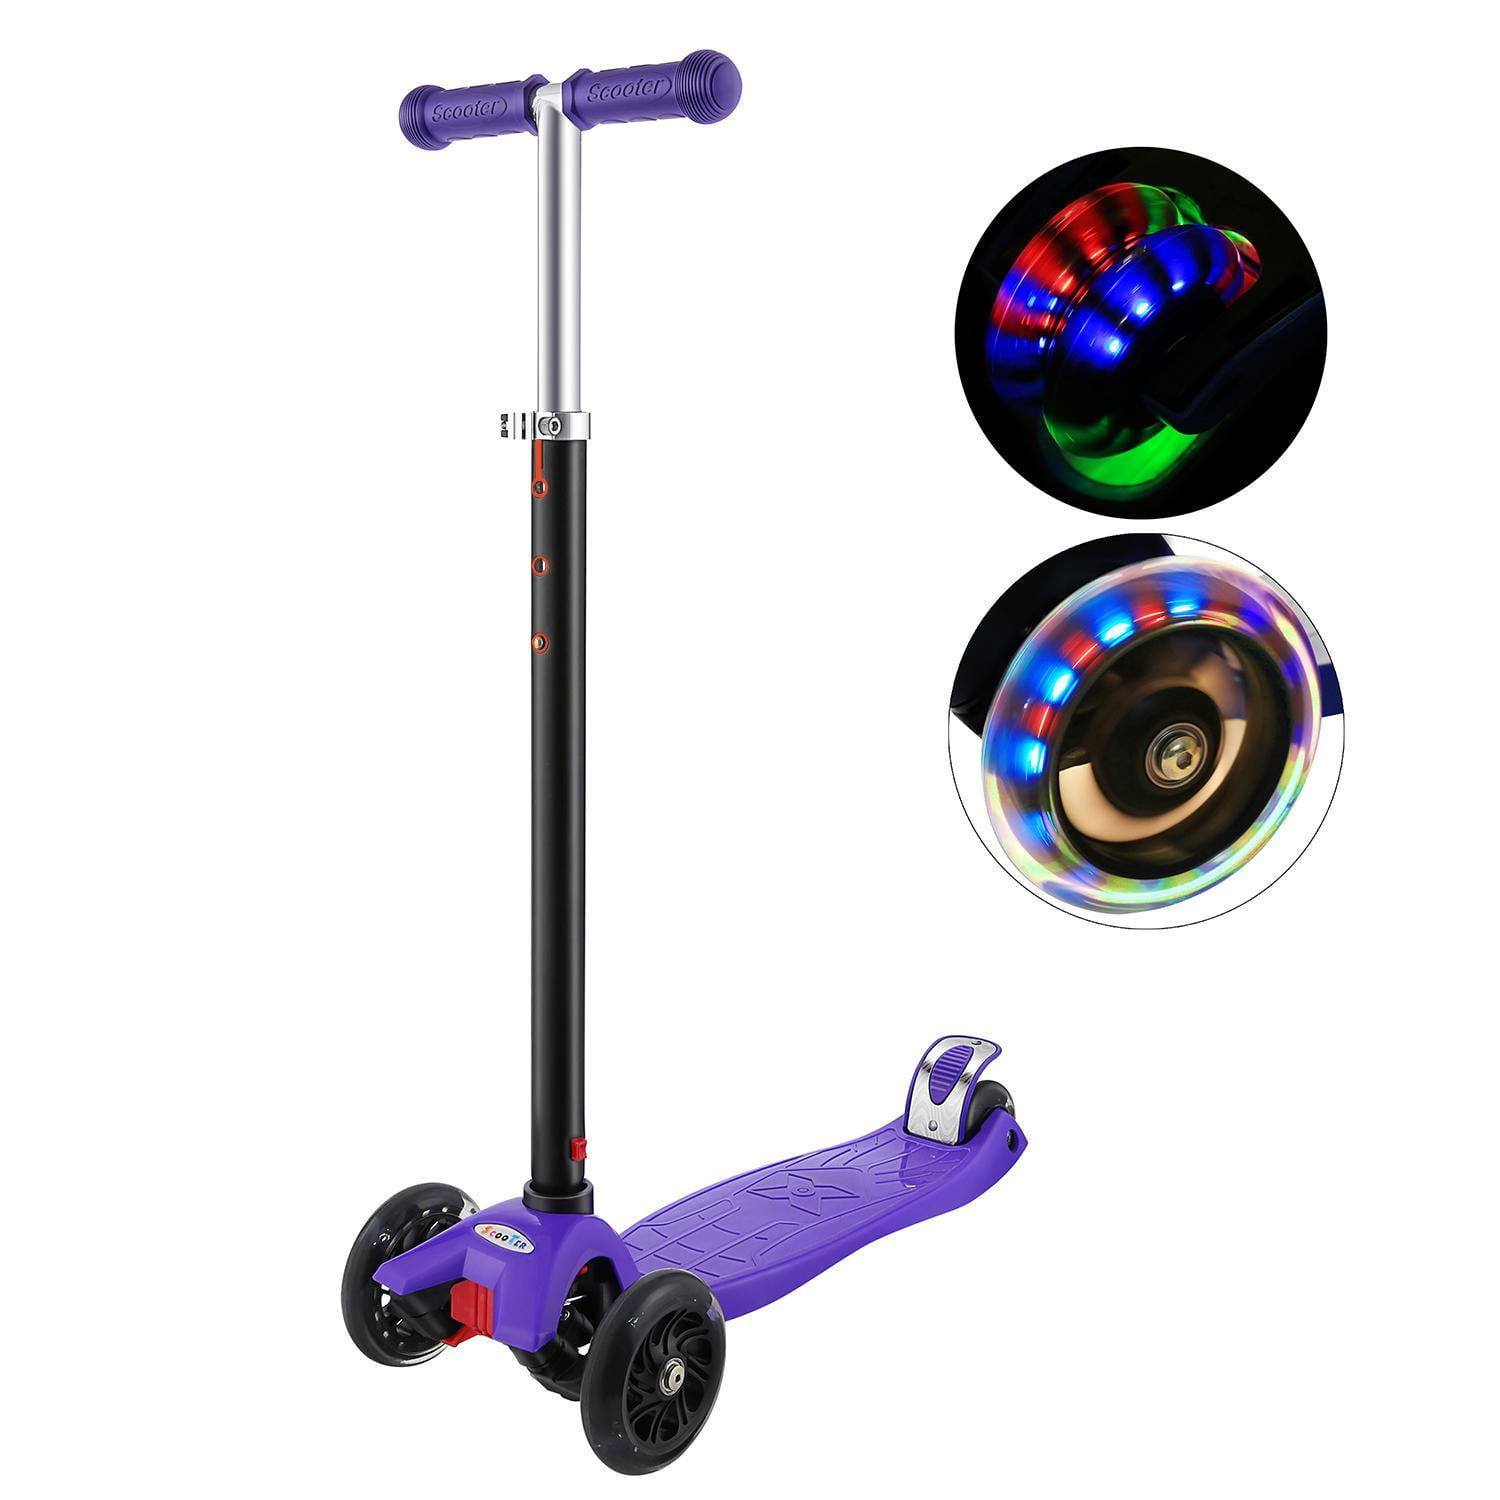 Toddler Scooter W/ 3 PU LED Wheels Kids Scooter Adjustable Heights Kick Scooter 